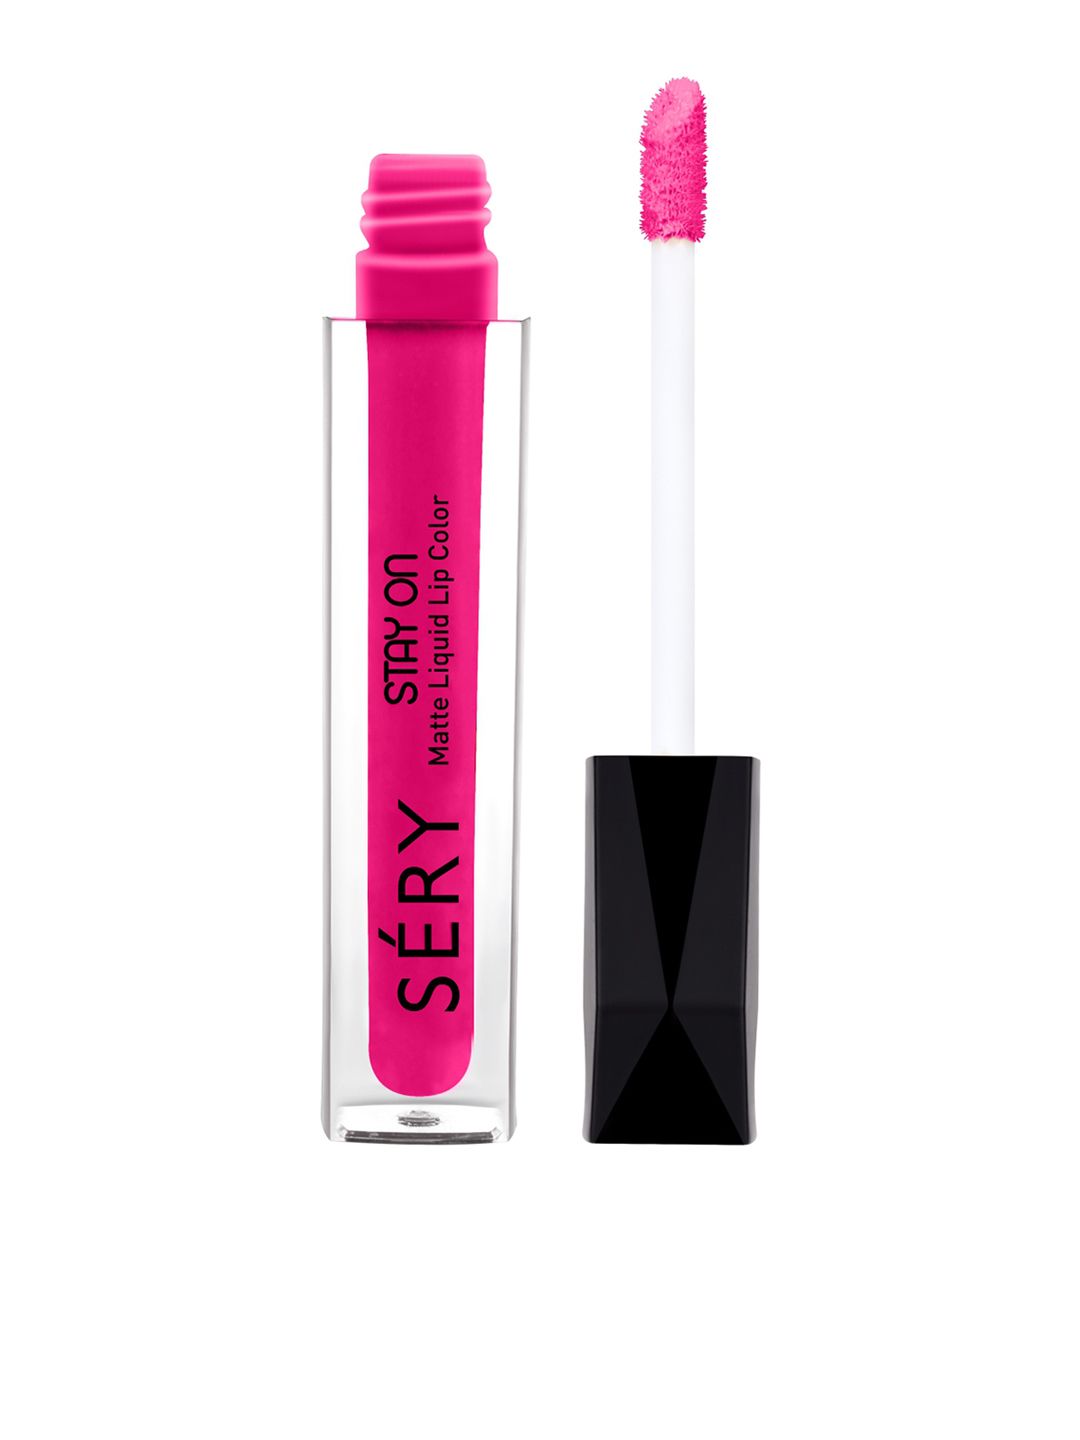 SERY Stay On Liquid Matte Lip Color - Tender Love LSO-14 Price in India